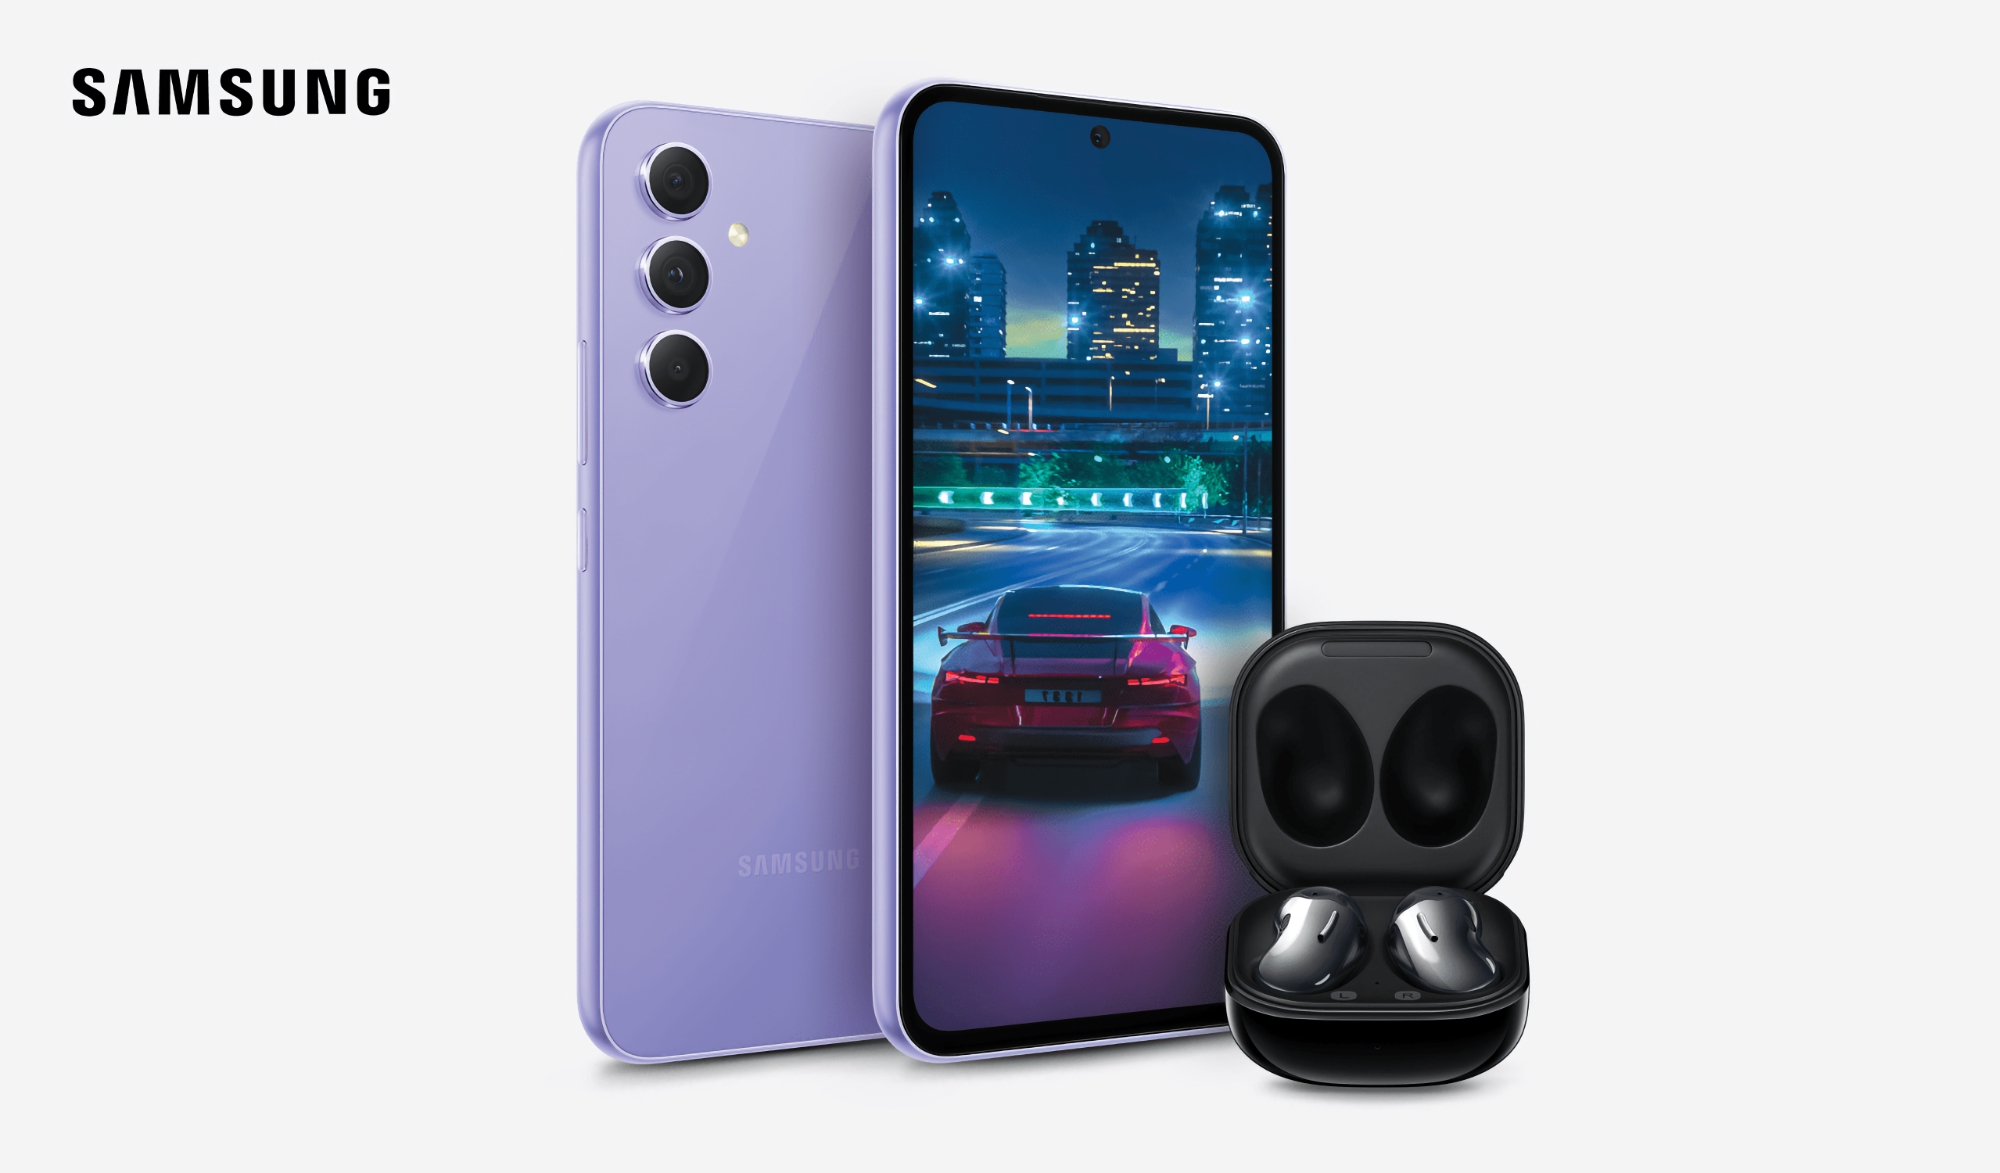 Cheaper together: Galaxy A54 5G and Galaxy Buds Live on sale on Amazon for $102 off